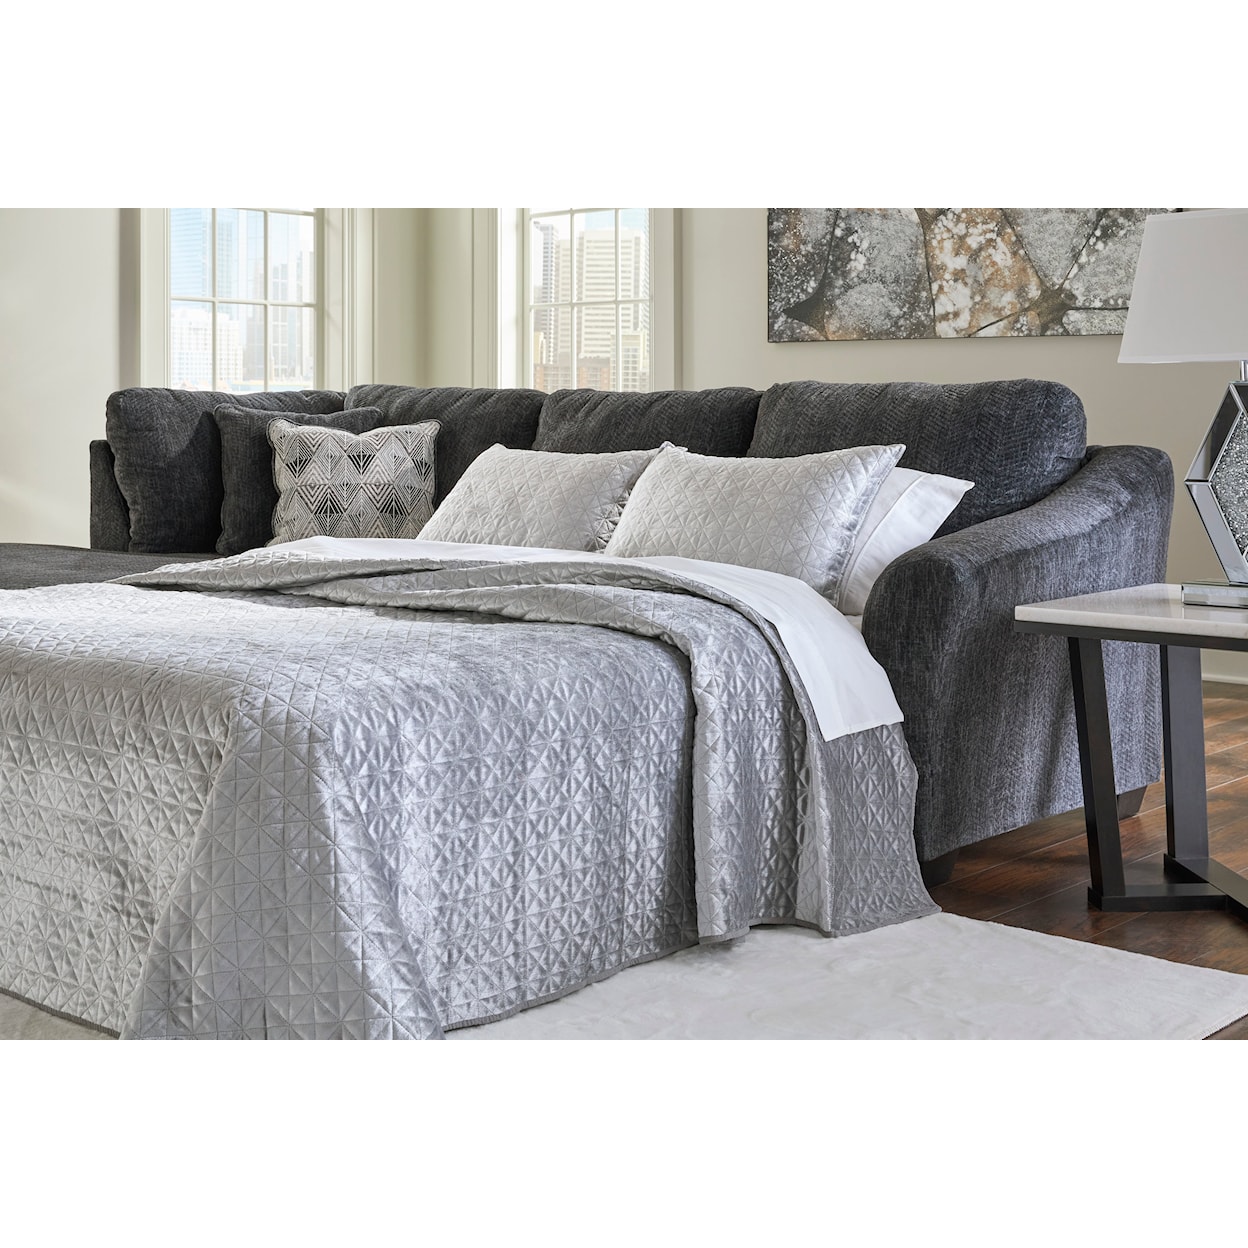 Ashley Signature Design Biddeford 2-Piece Sleeper Sectional with Chaise